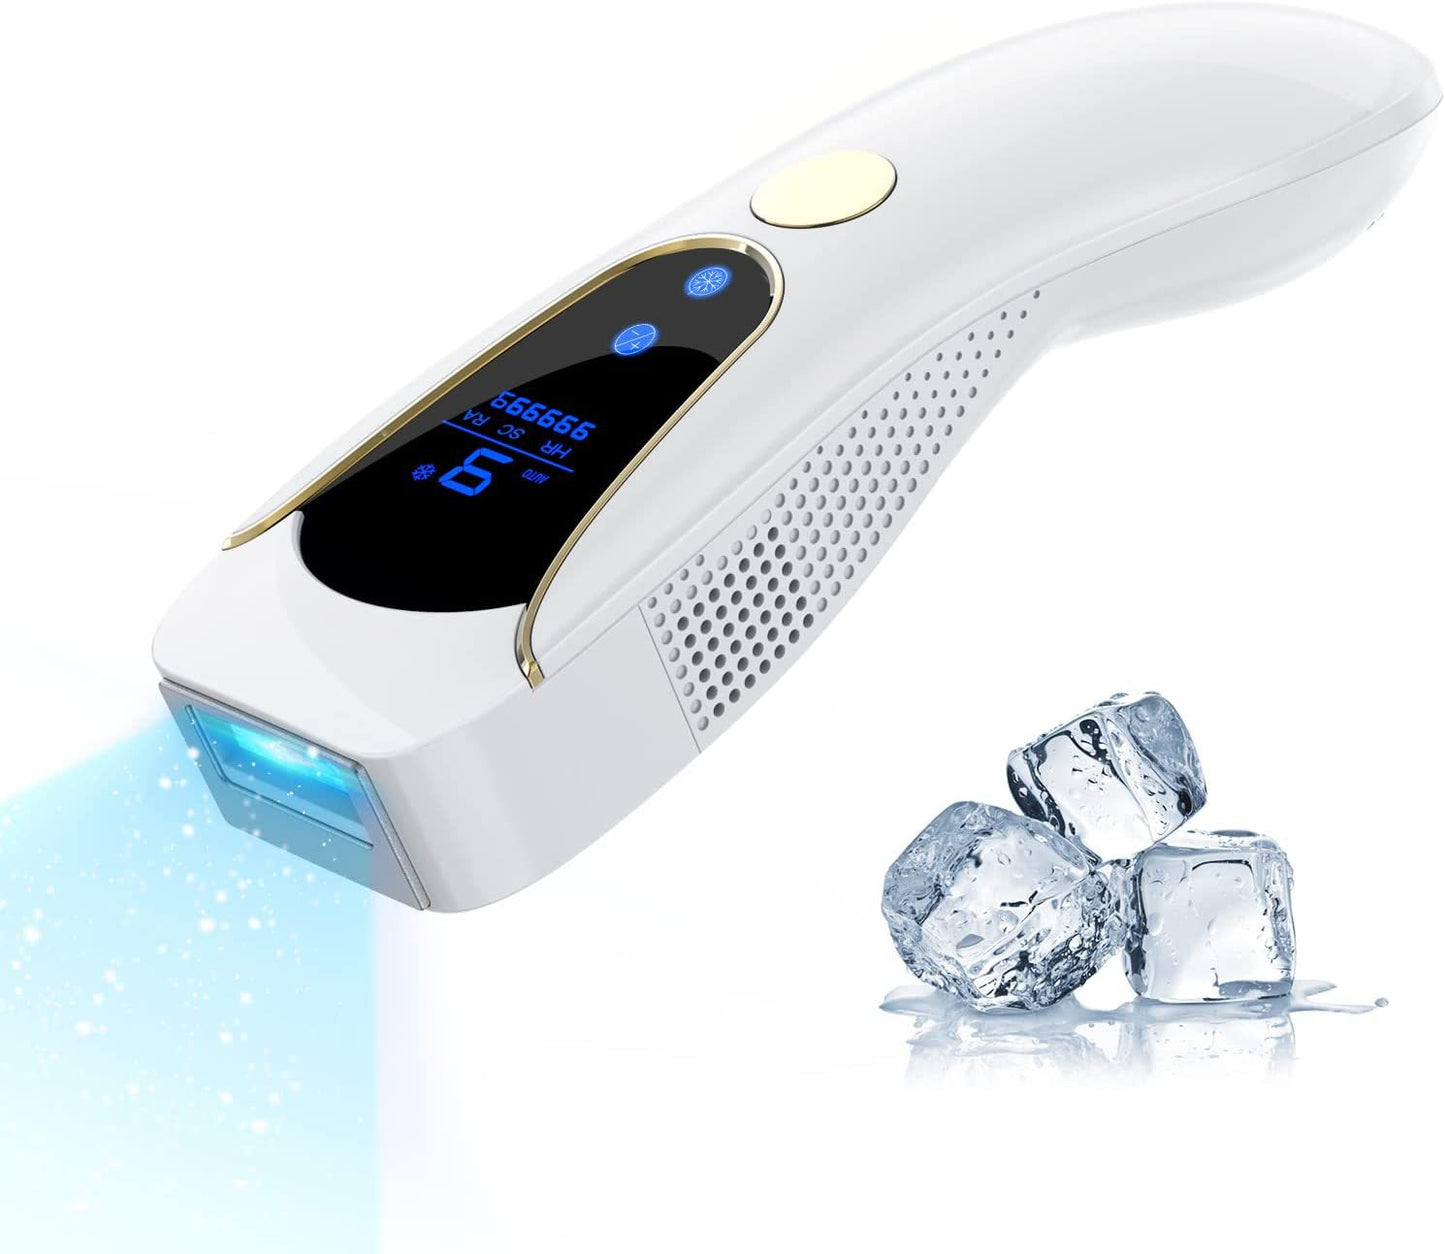 Compact IPL Hair Removal Device for Women - Electronic Supreme